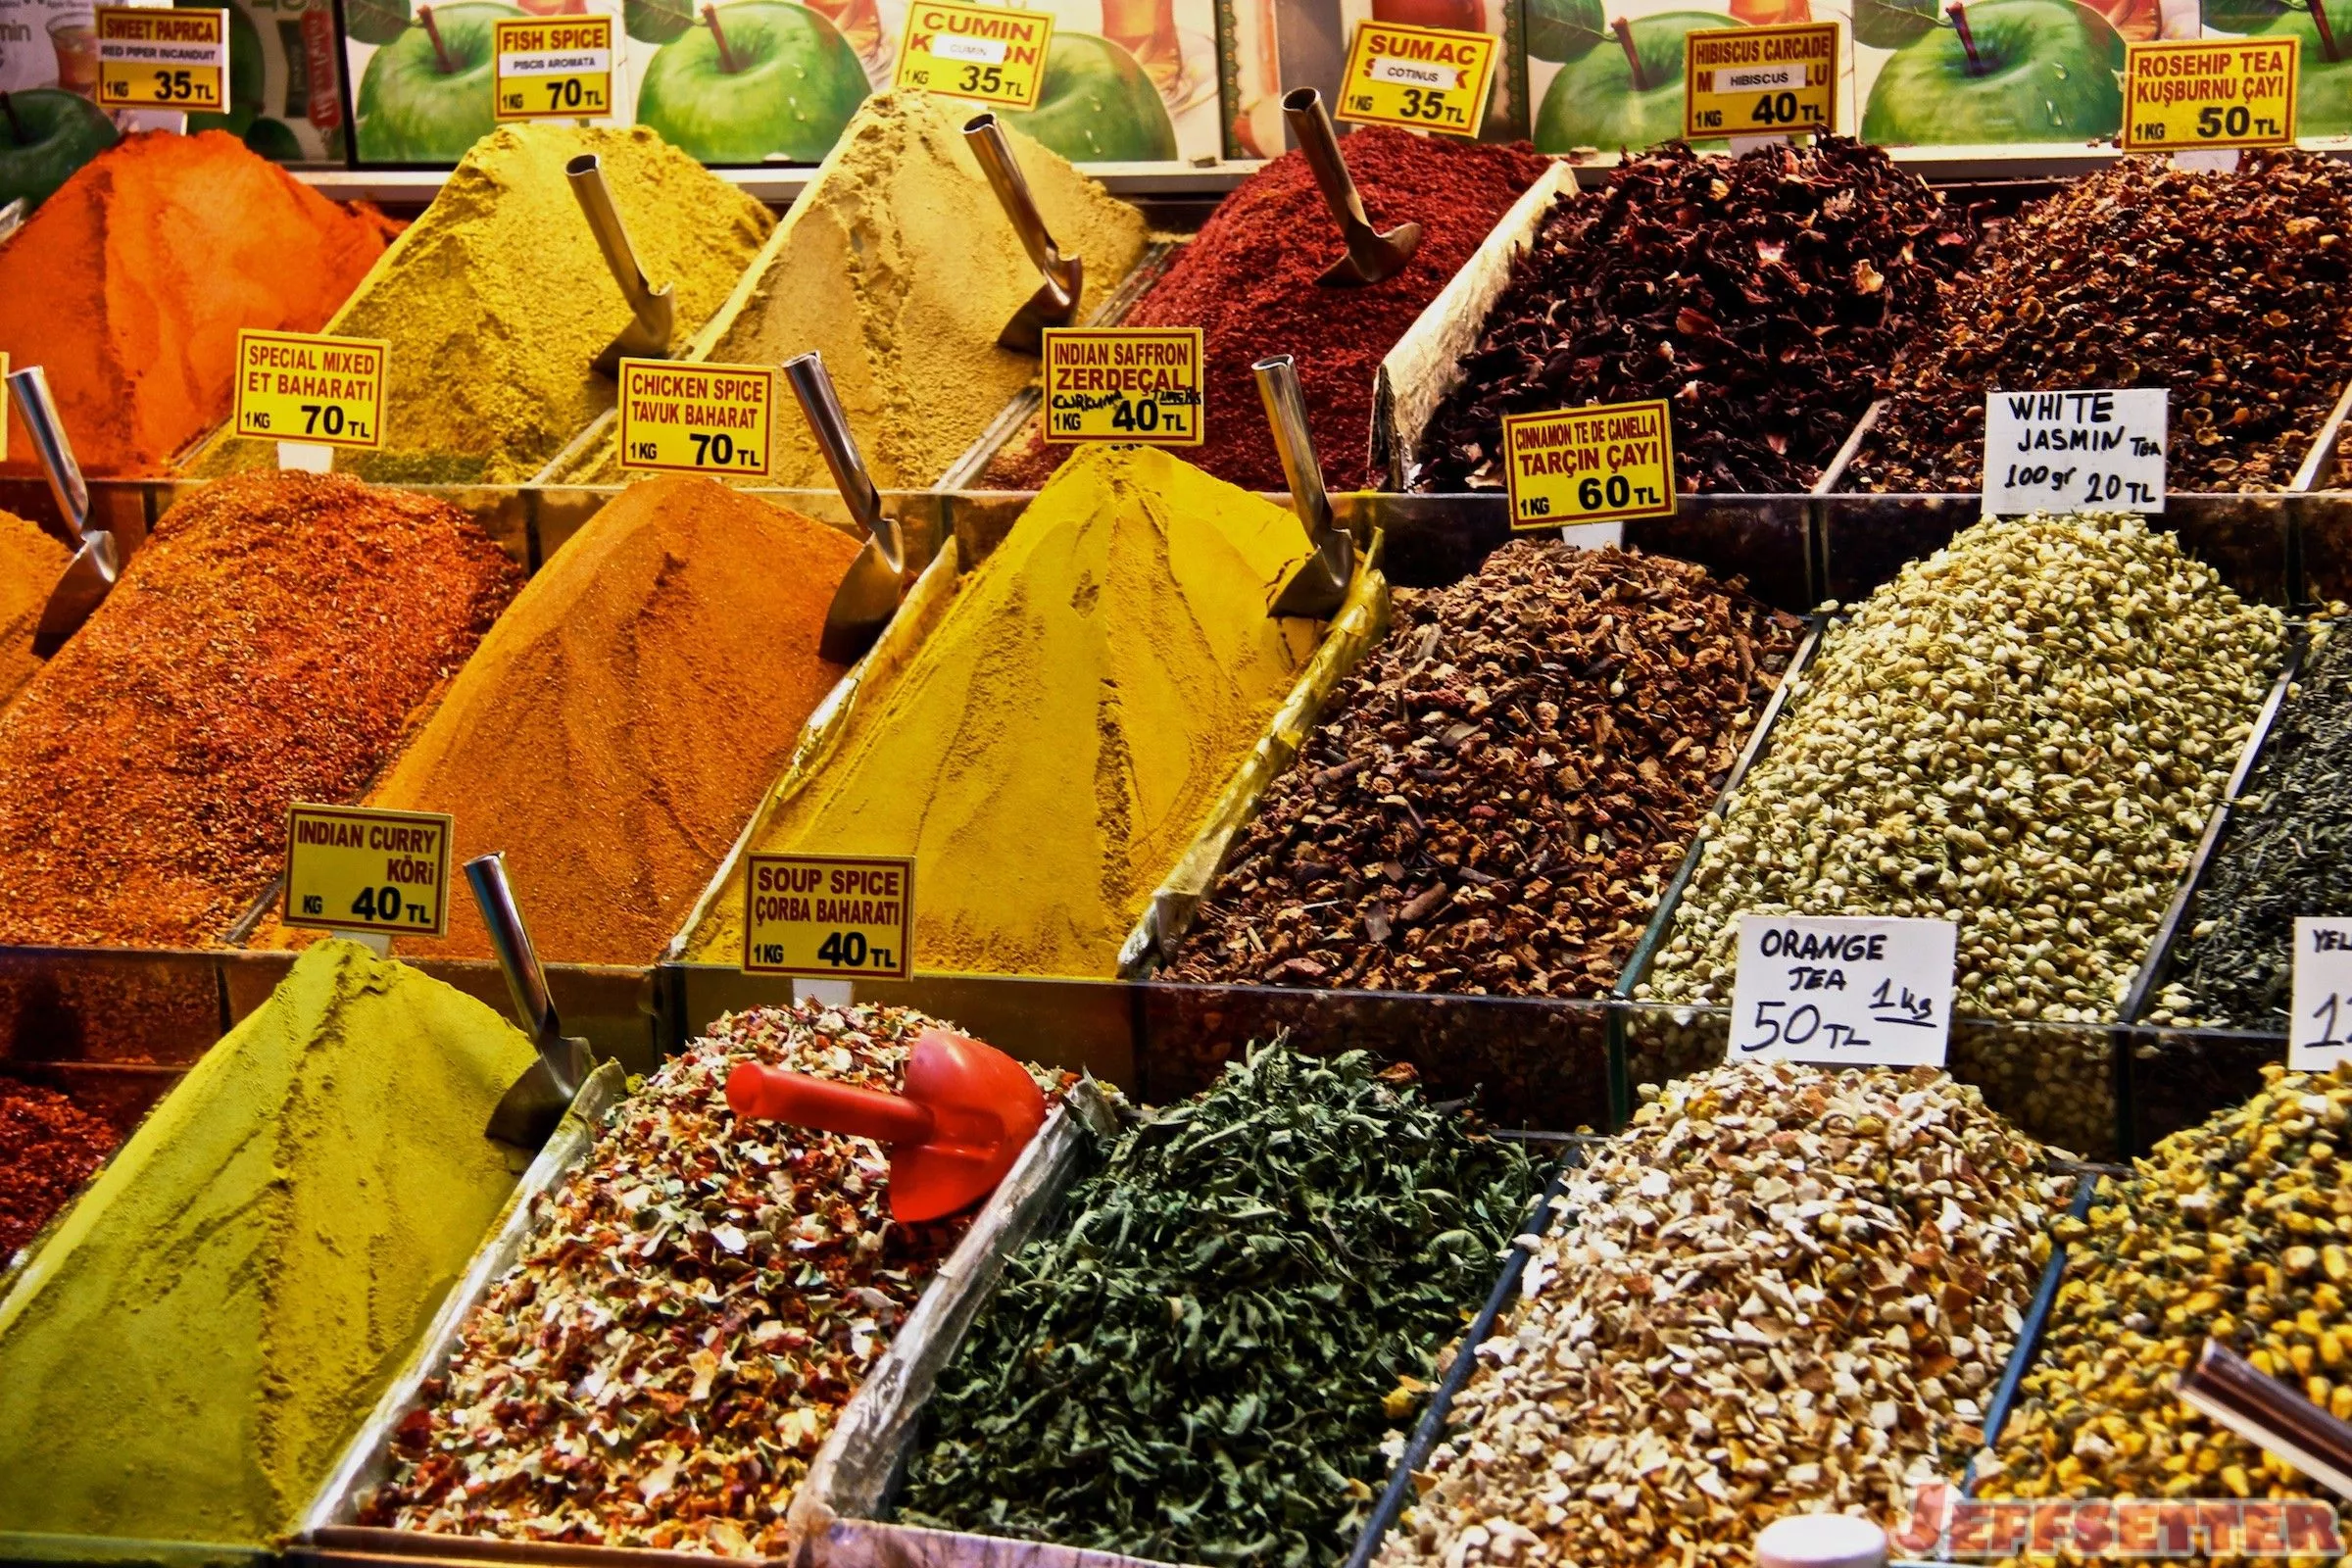 Galata Spice Shop in Turkey, central_asia | Spices,Herbs - Country Helper